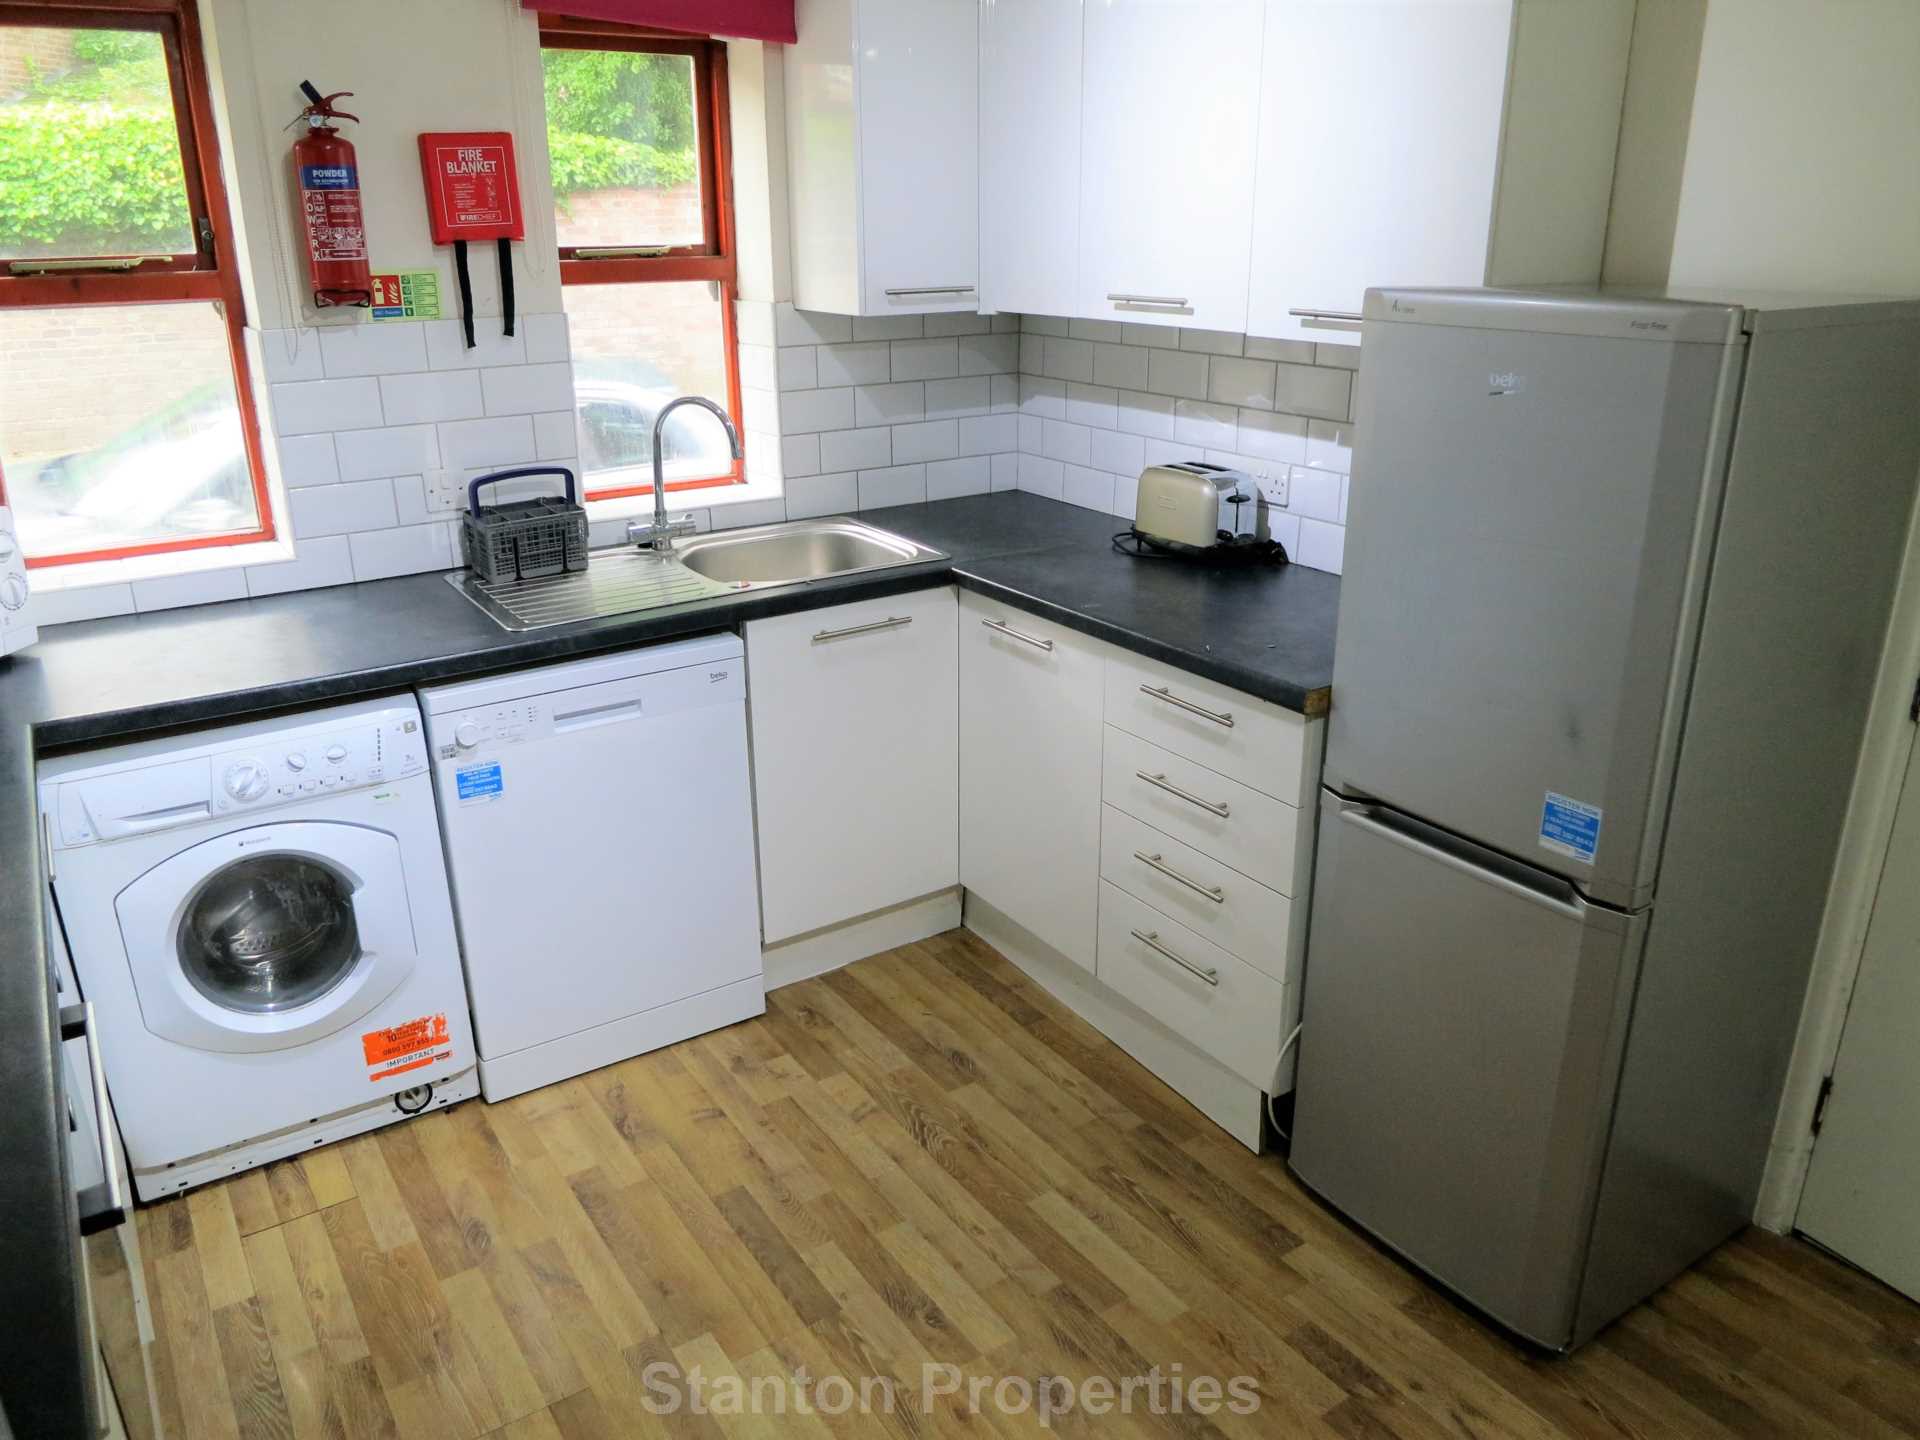 £150 pppw including bills, Burton Road, Withington, Image 2